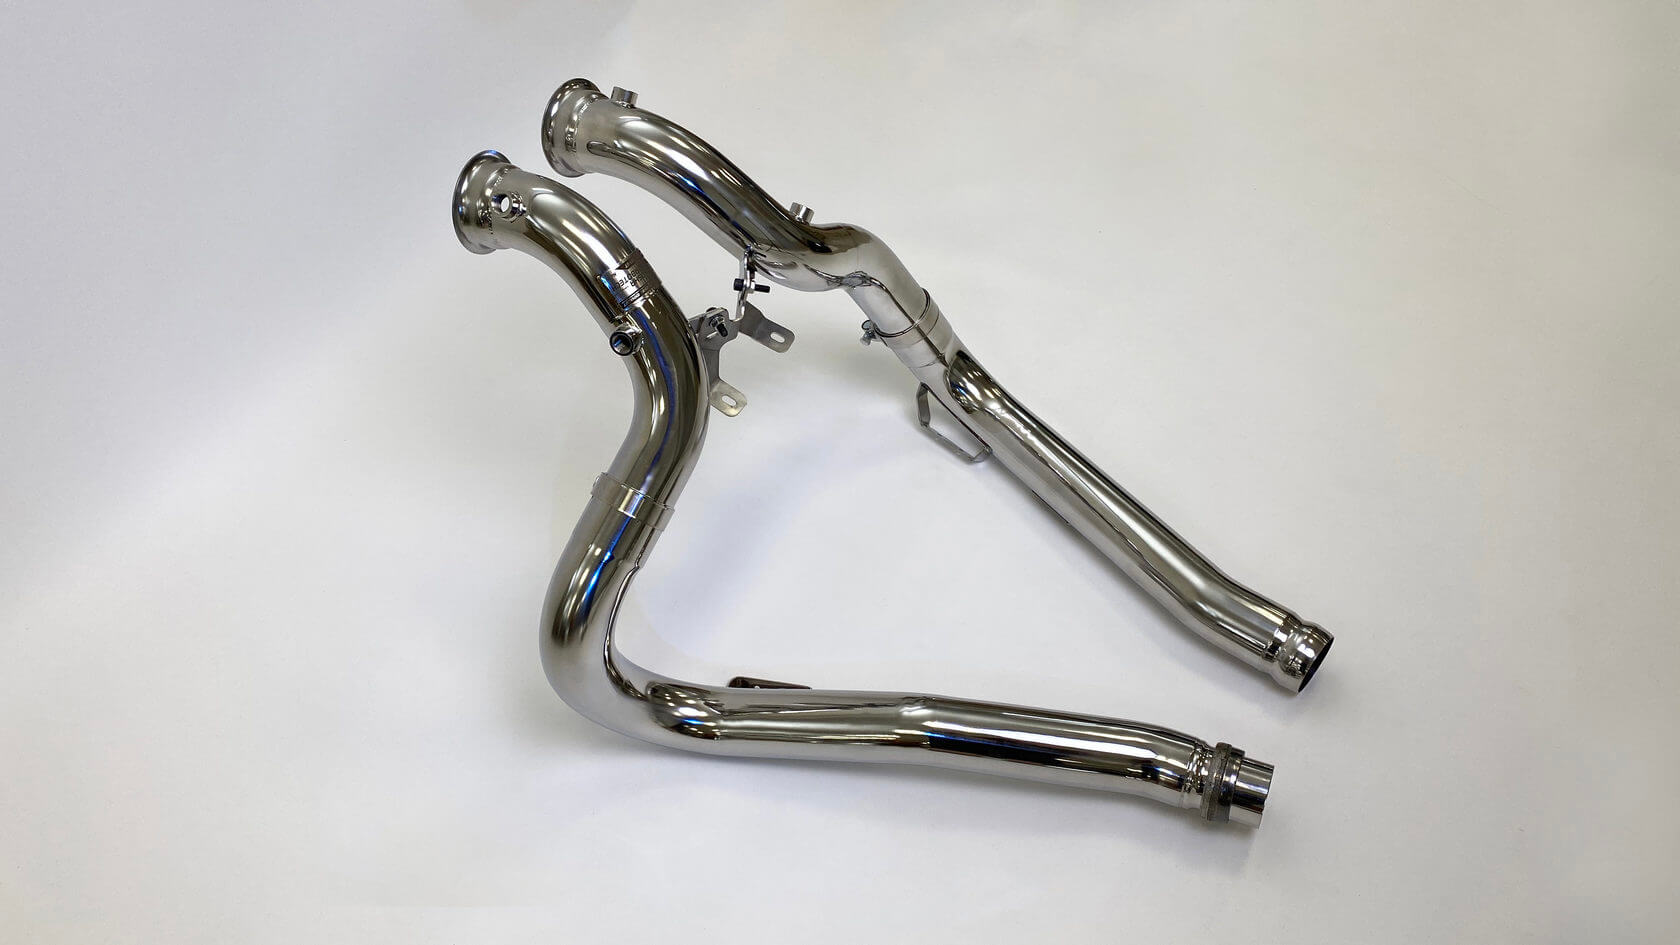 DEIKIN 10-MB.GT63s.R190.C190-DP Downpipe for Mercedes-AMG GT 63s (R190) without HeatShield Photo-0 